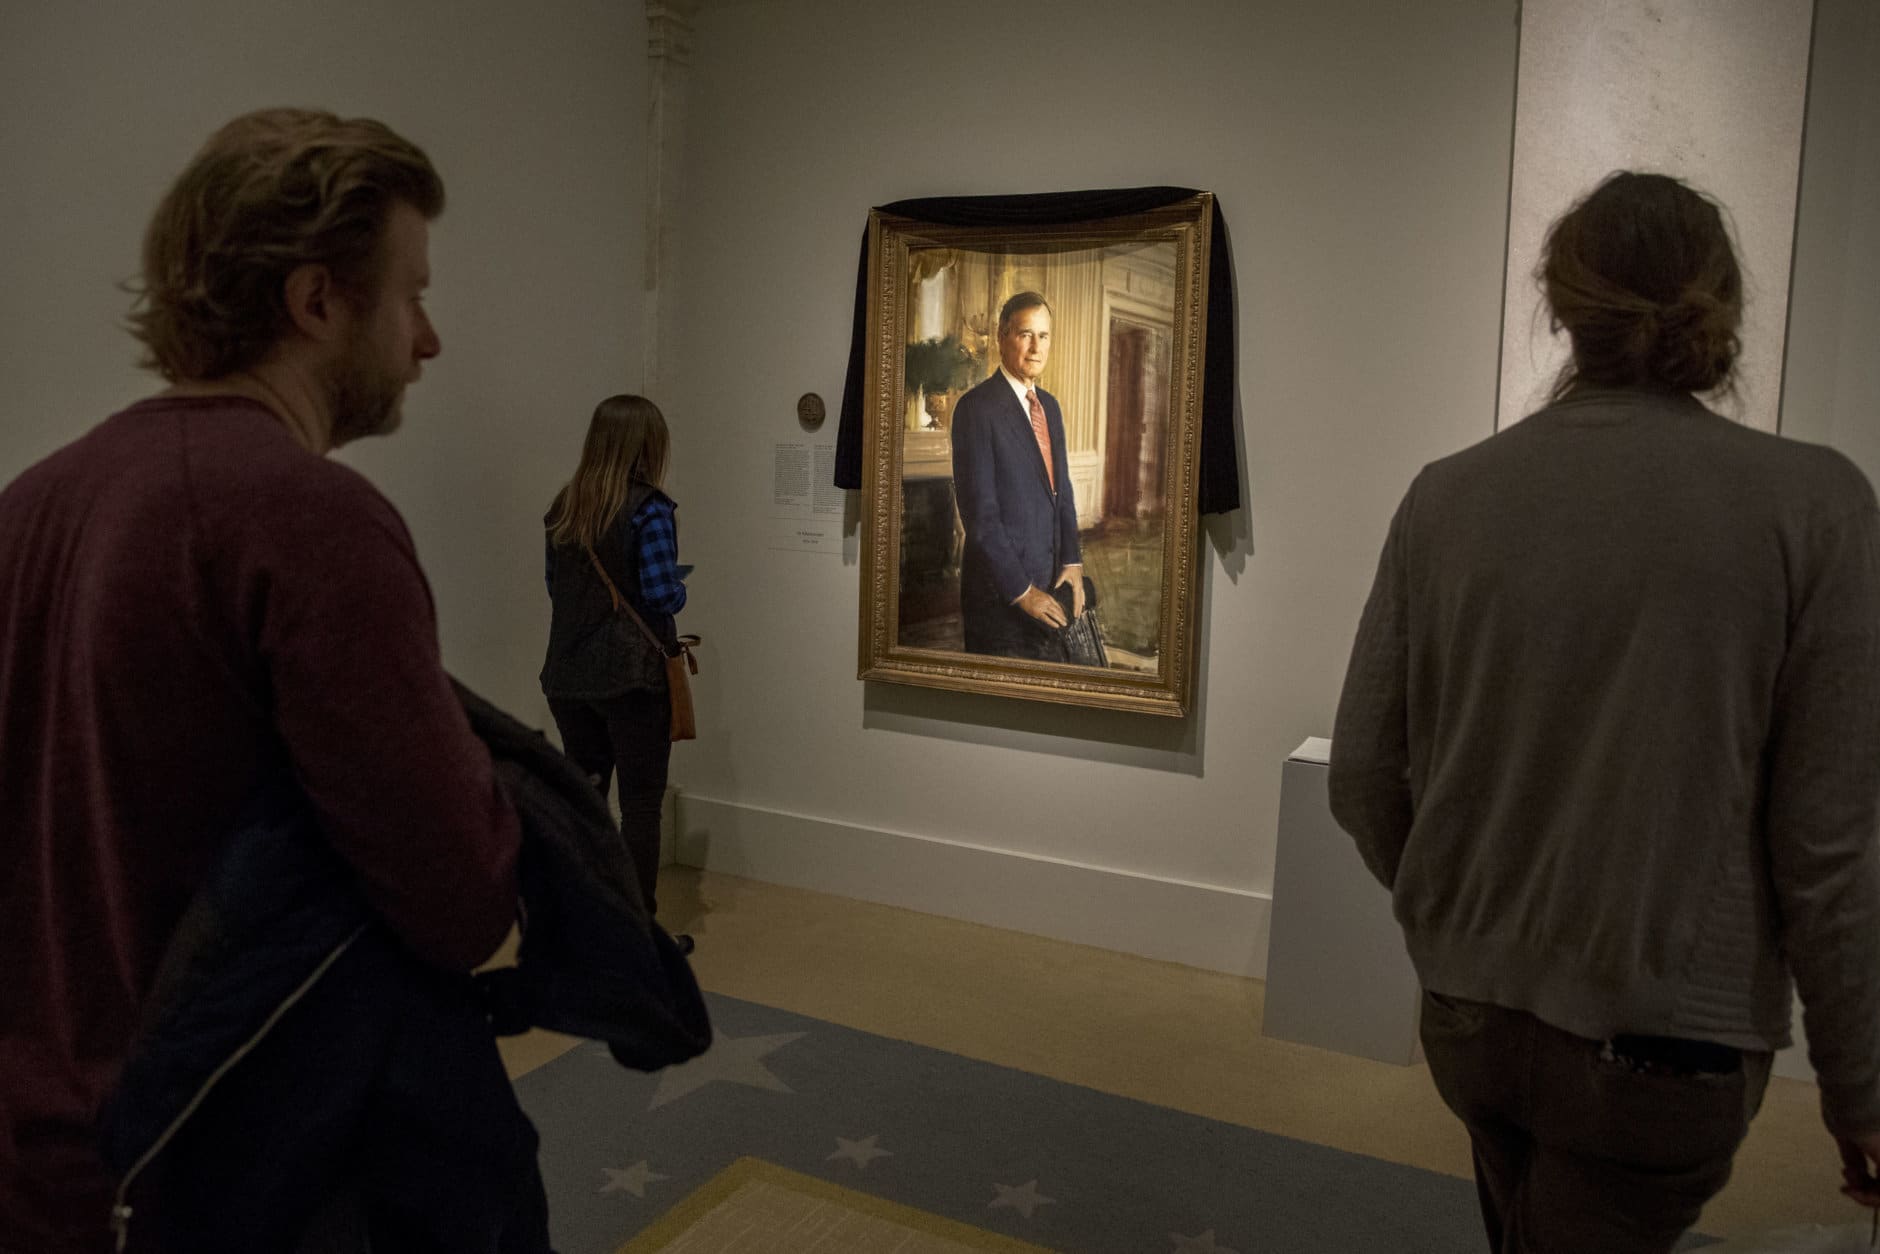 Visitors stop to look at the official portrait of former President George H.W. Bush as it is draped in black cloth at the National Portrait Gallery in Washington, Monday, Dec. 3, 2018, to mark his passing. Bush will lay in state at the Capitol building this week before being buried in Texas. (AP Photo/Andrew Harnik)